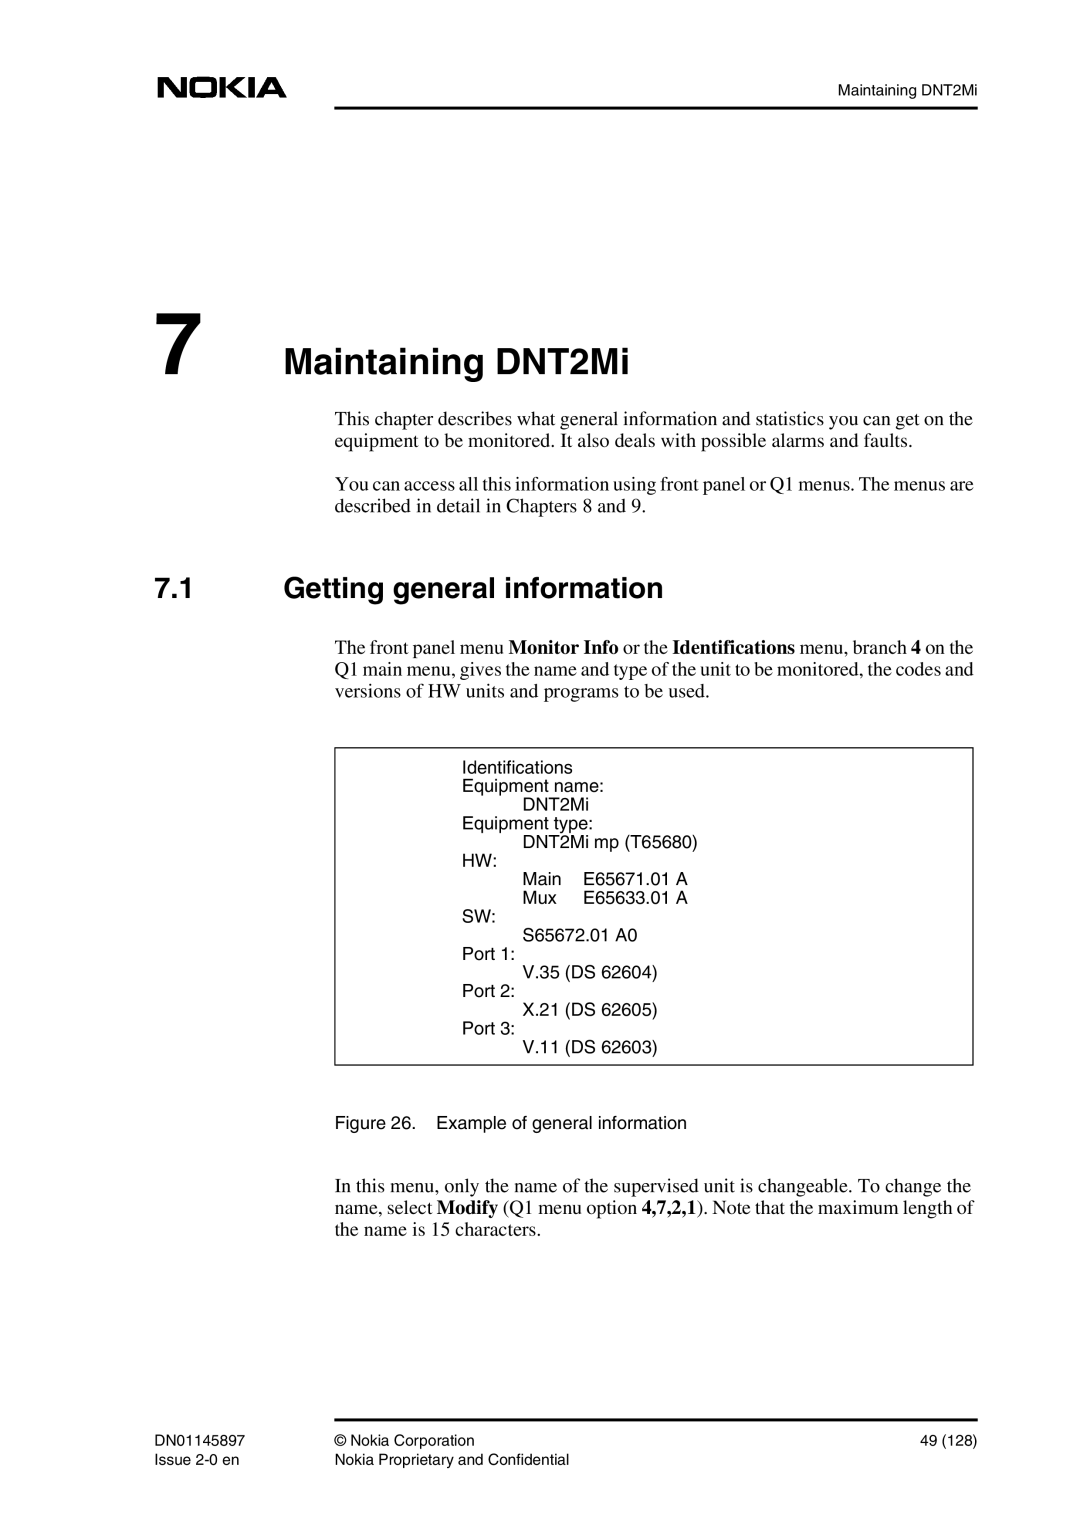 Nokia DNT2Mi sp/mp user manual Maintaining DNT2Mi, Getting general information 